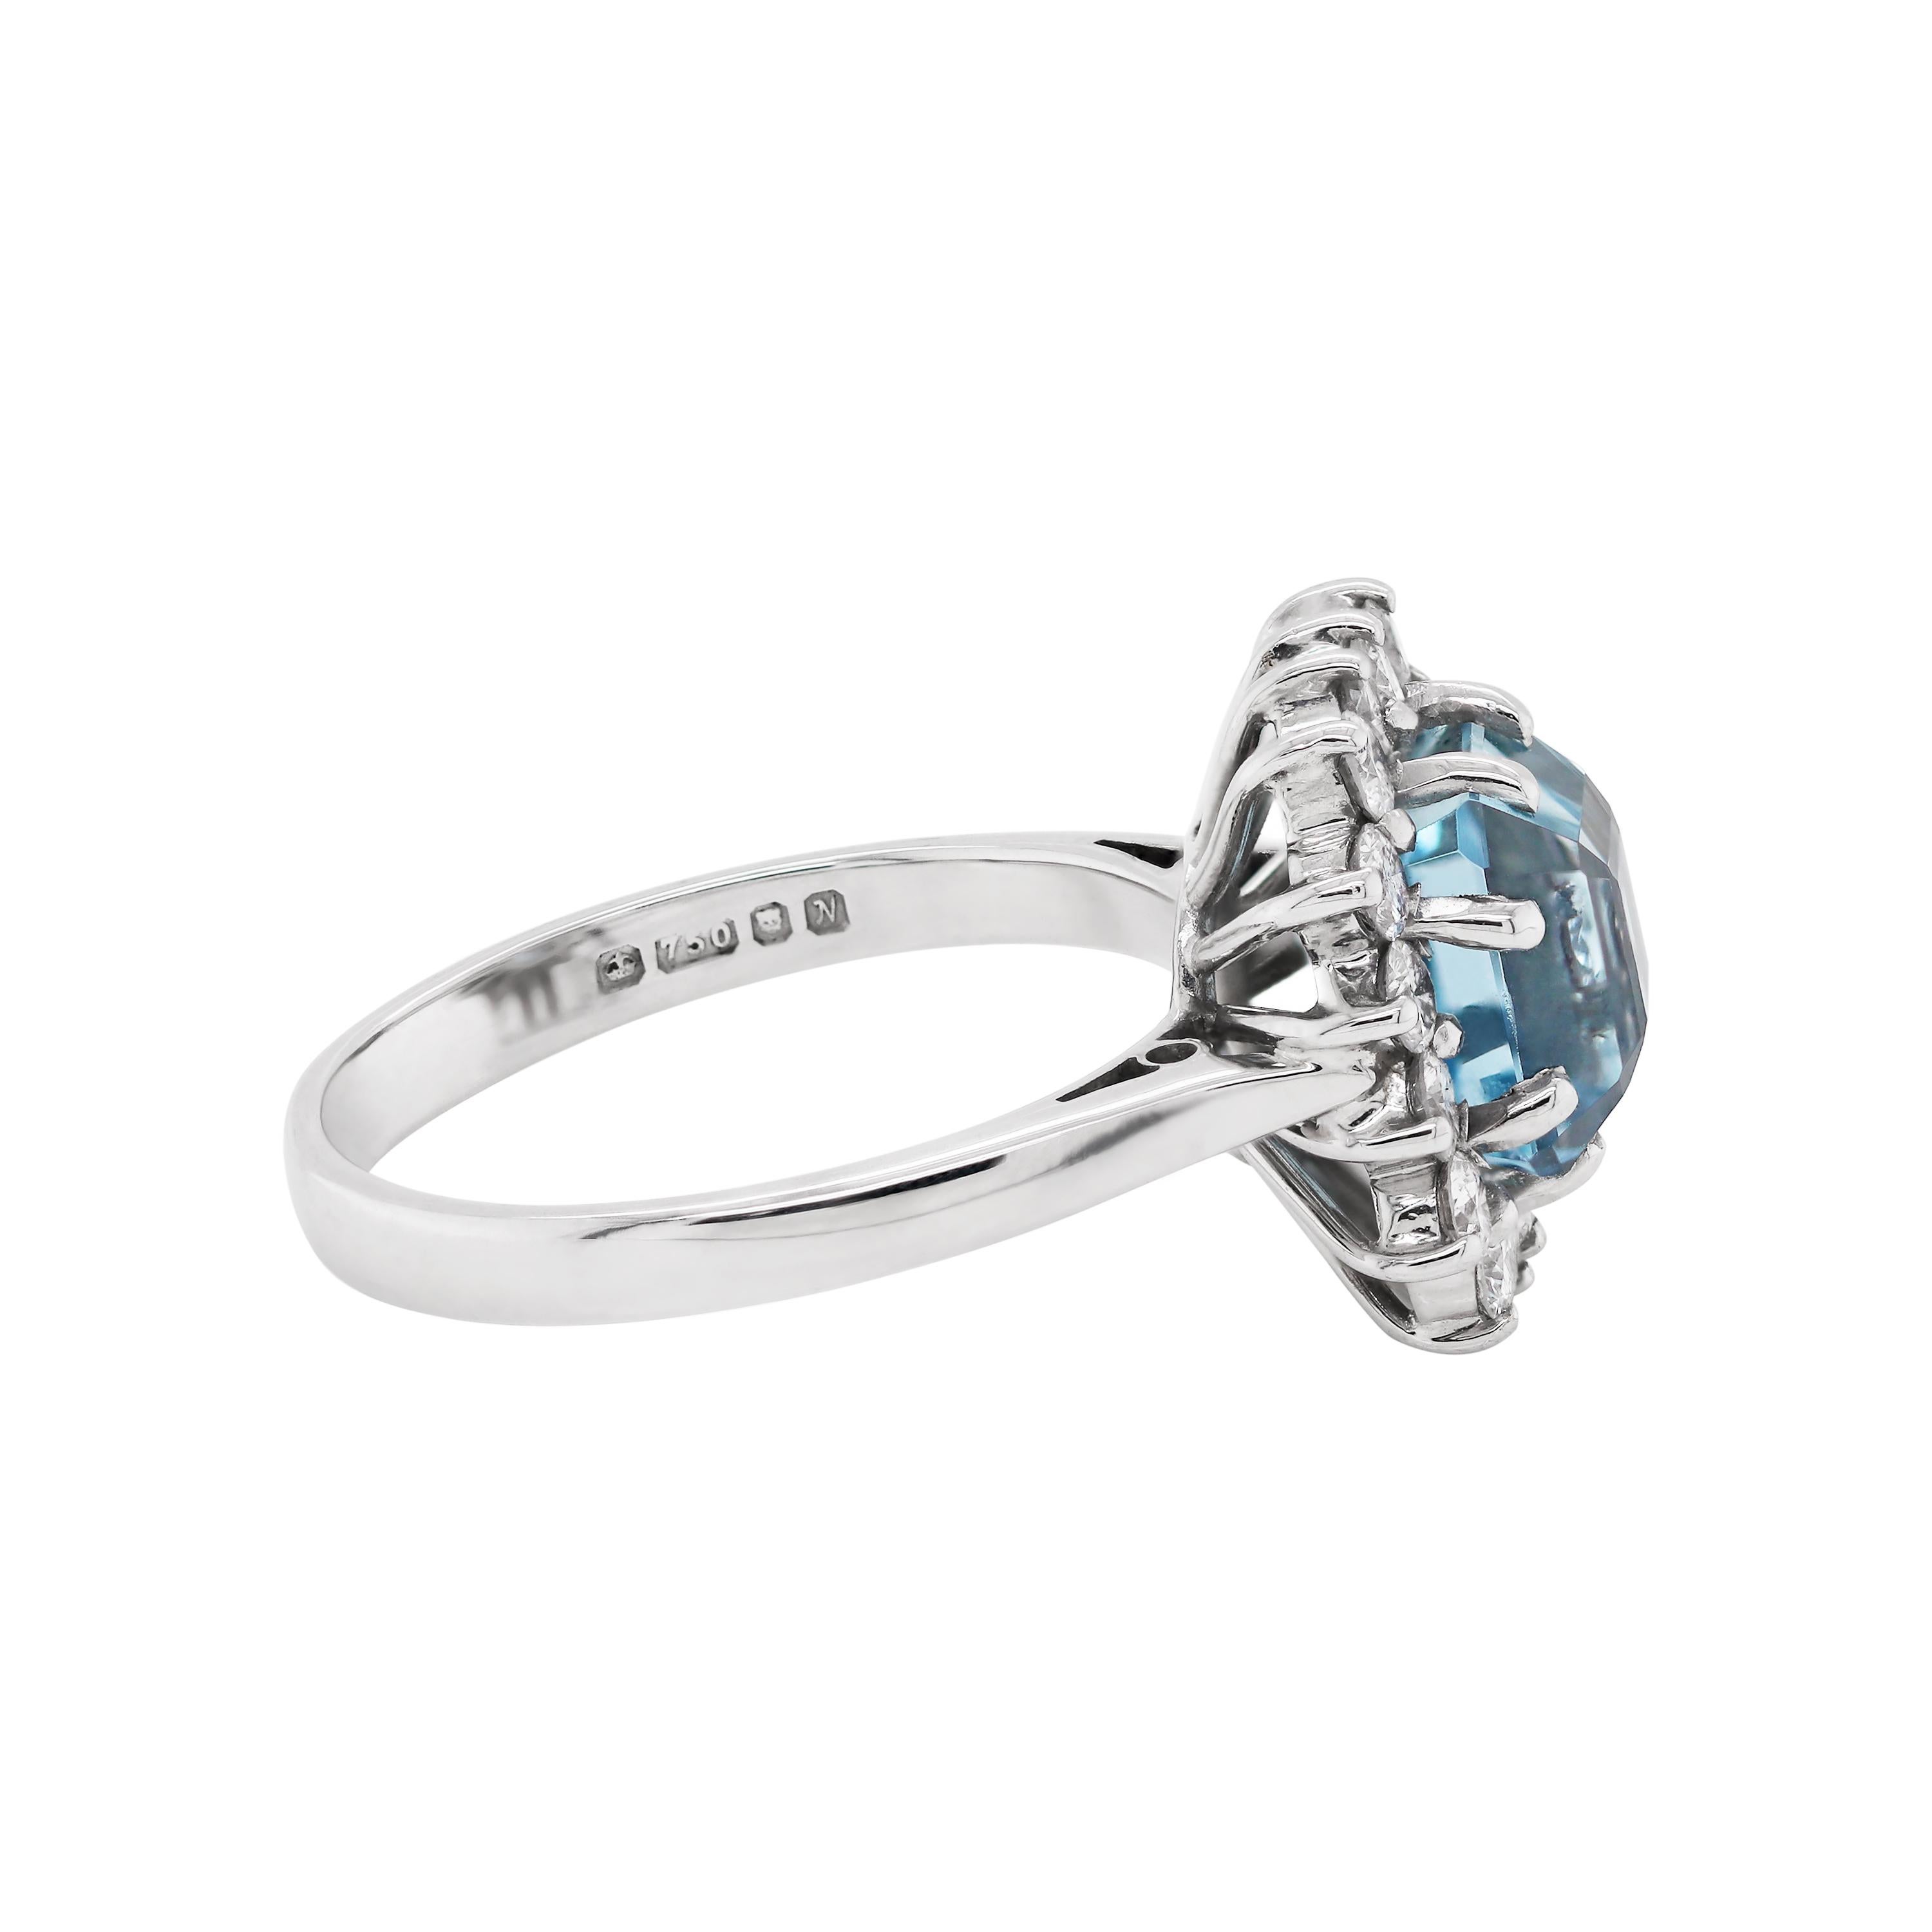 This gorgeous engagement ring features a 2,92ct square emerald cut Aquamarine mounted in a four claw, open back setting. The translucent blue stone is beautifully surrounded by 16 fine quality round brilliant cut diamonds weighing a total